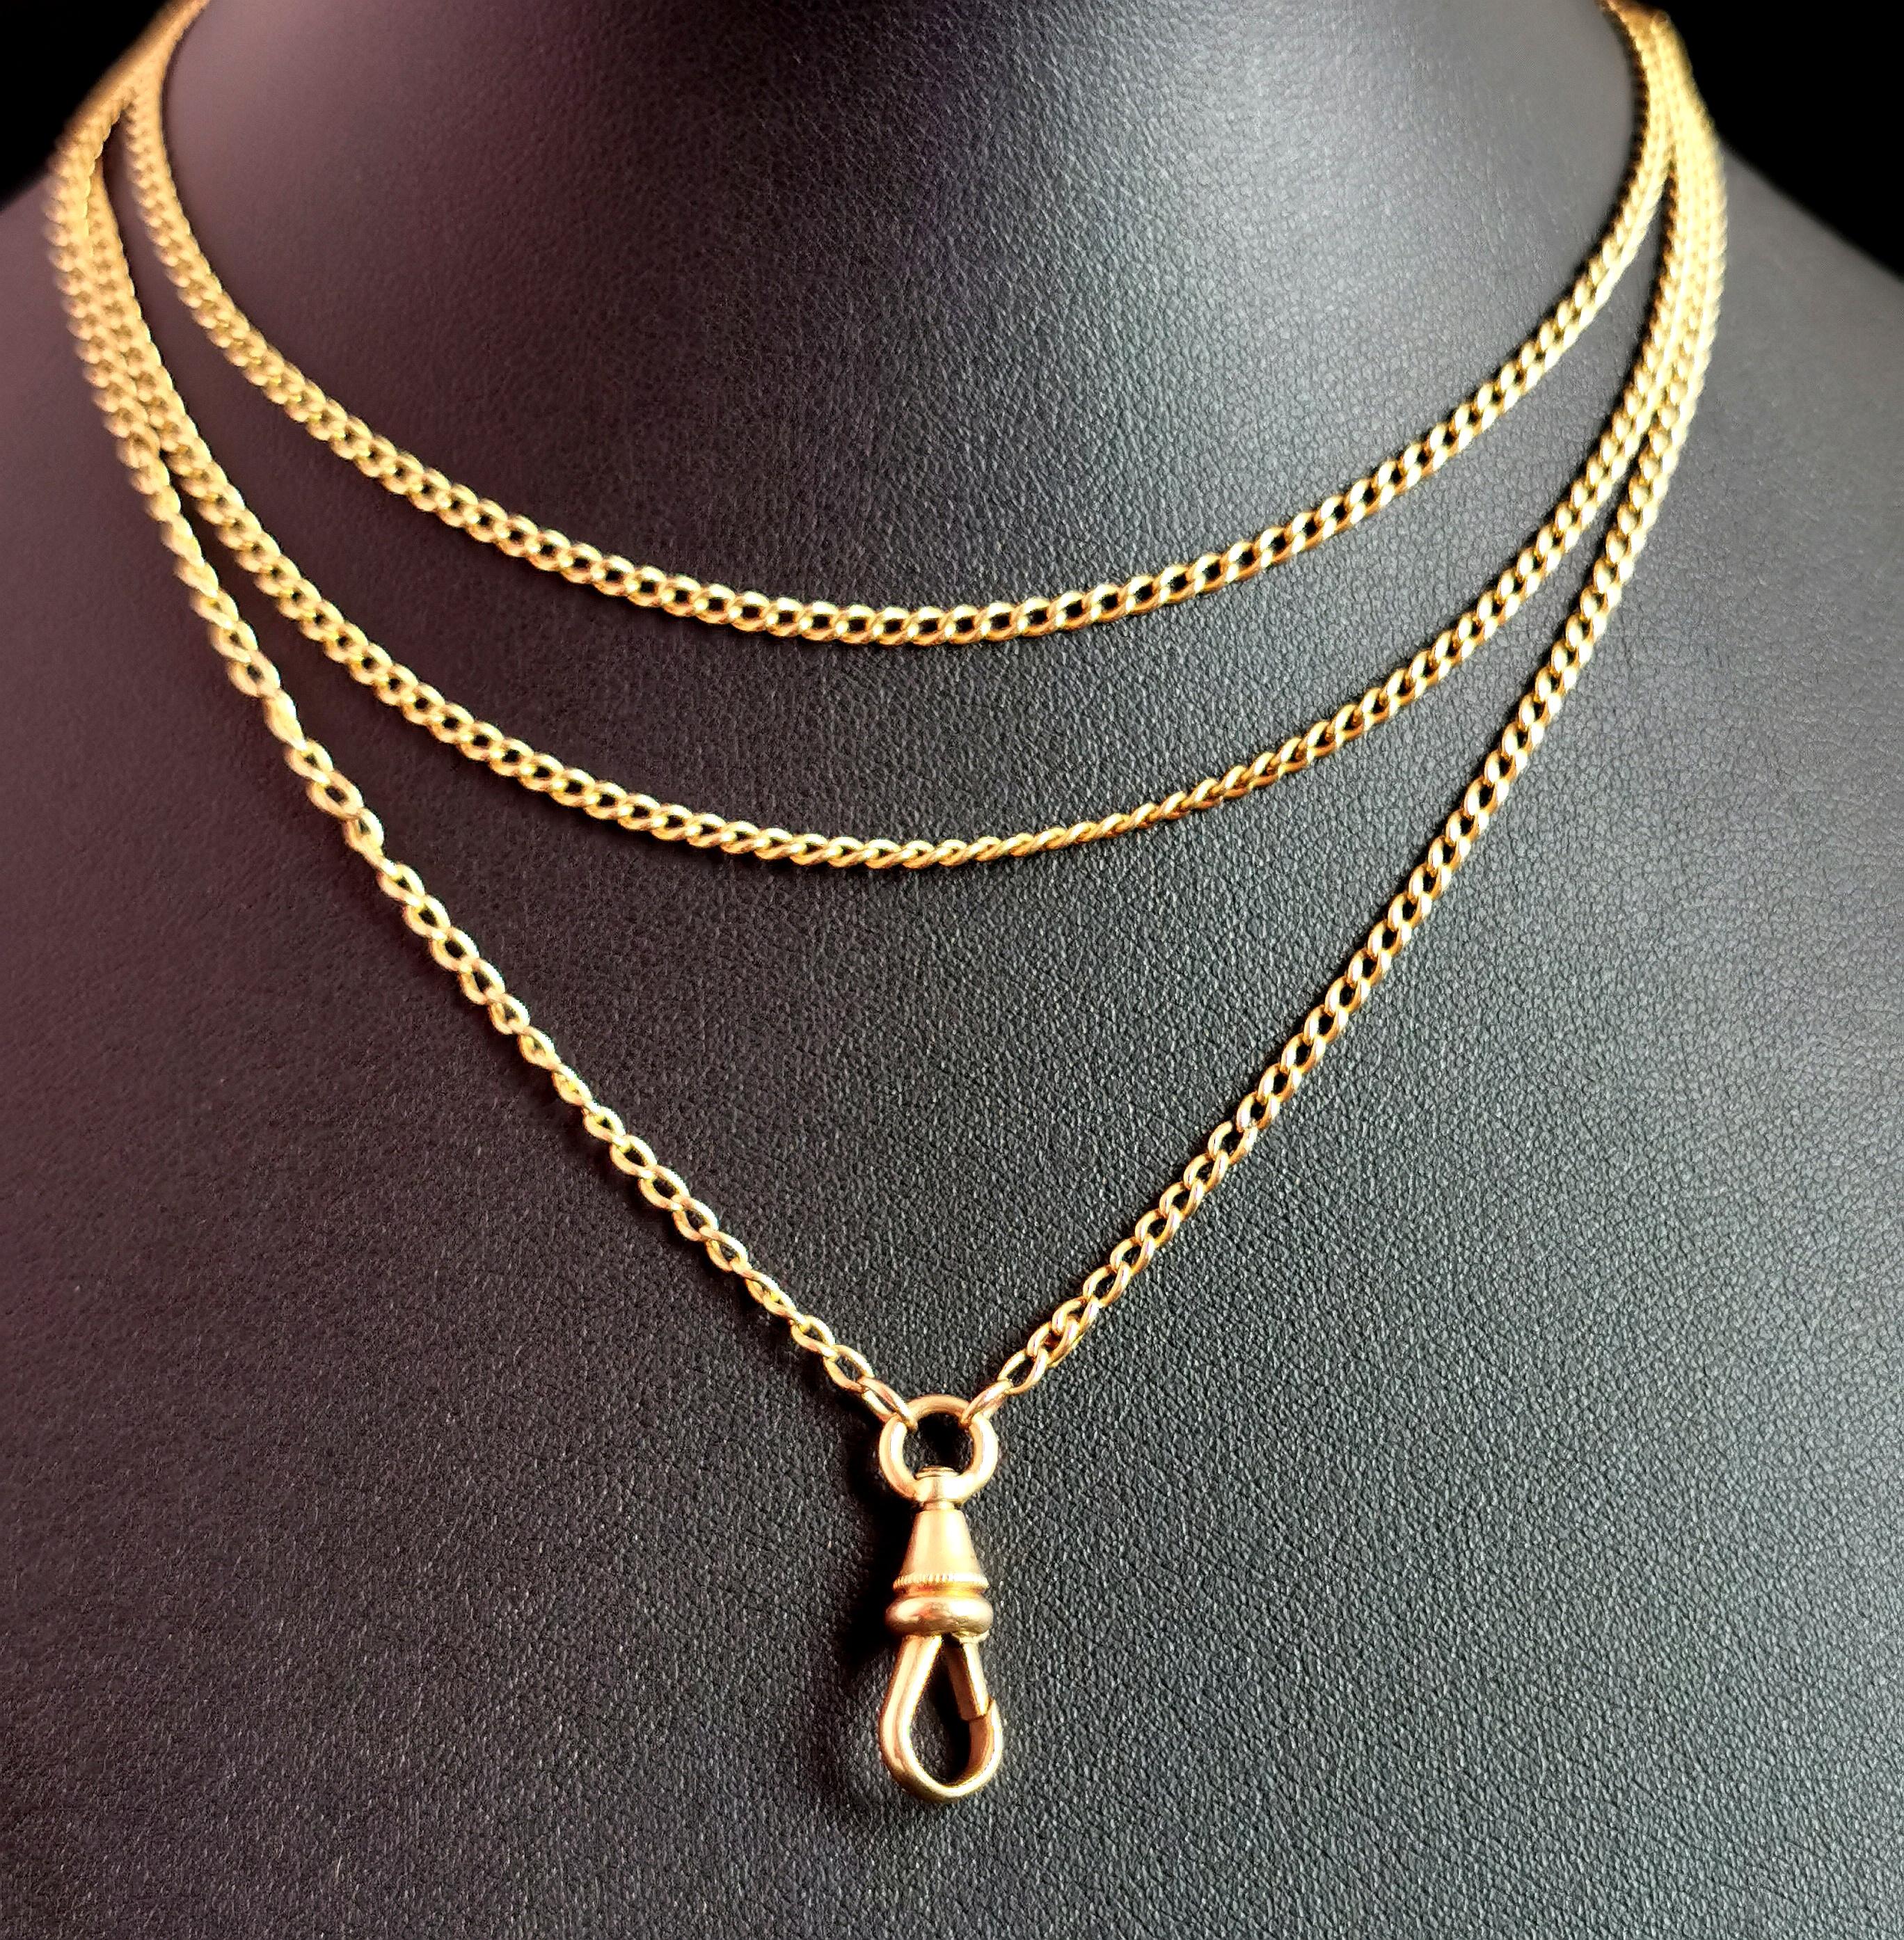 A beautiful antique, late Victorian era 18kt gold longuard chain necklace.

The lush, rich 18kt gold is warm and and inviting with a hue that is highly sought after.

It has elongated curb links with an attached dog clip fastener and an 18c tag to